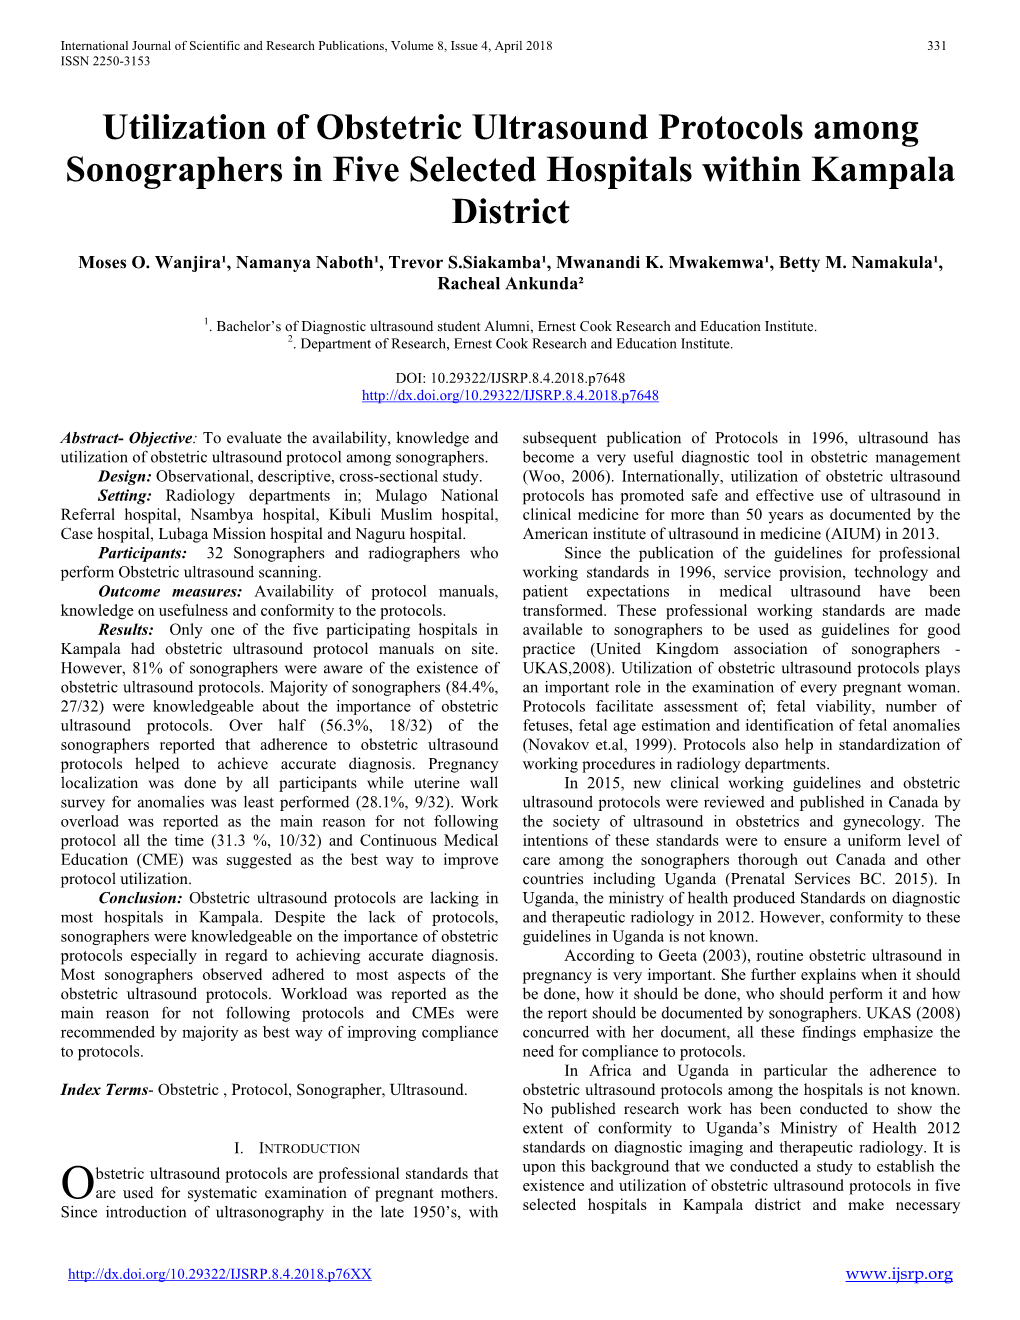 Utilization of Obstetric Ultrasound Protocols Among Sonographers in Five Selected Hospitals Within Kampala District